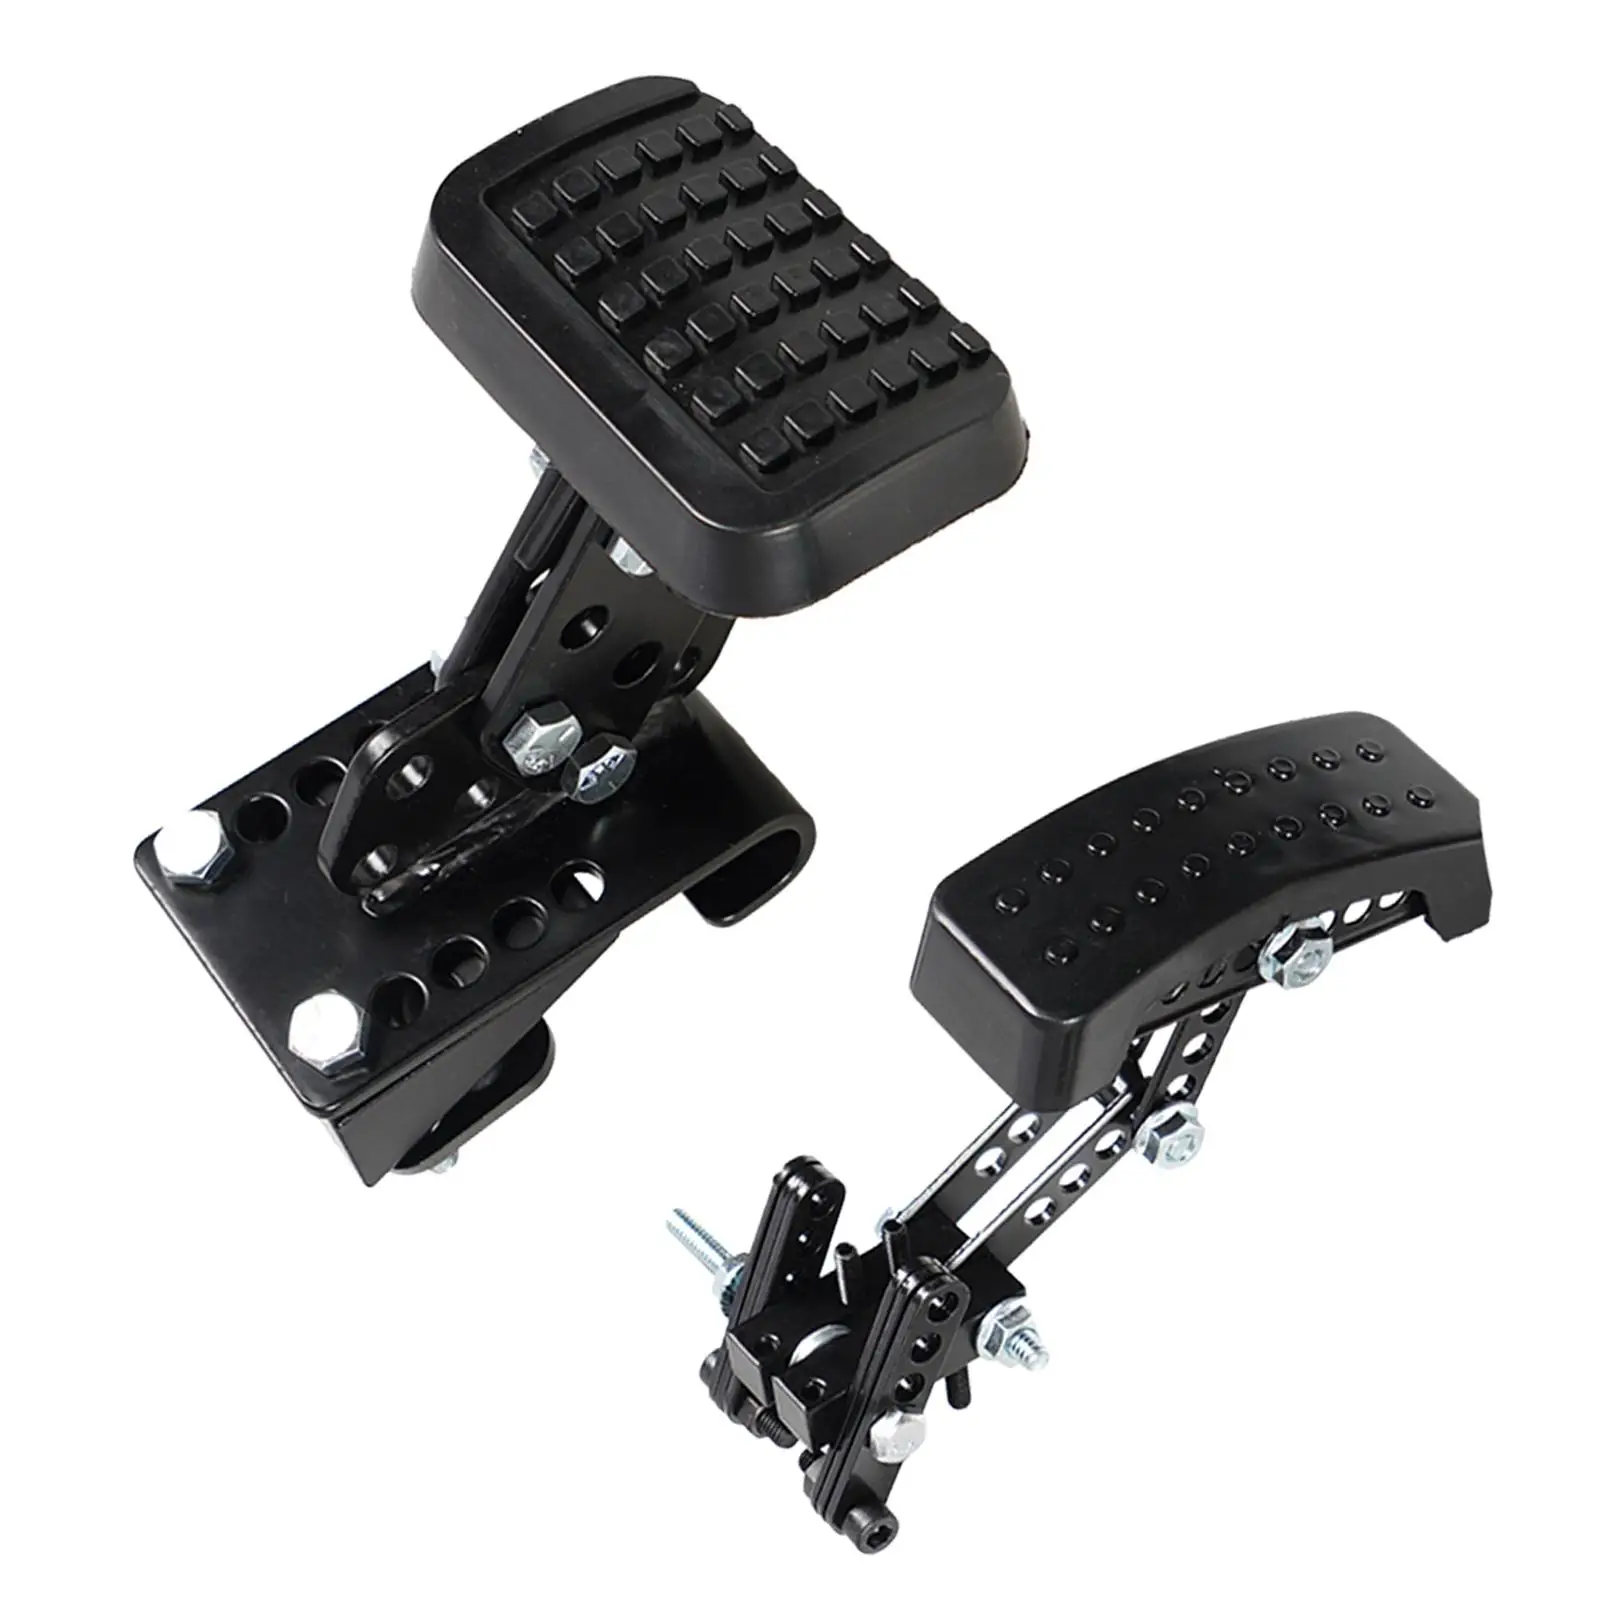 Brake and Pedals Extender Pedal Extension Enlarge Pedal Assembly for Short